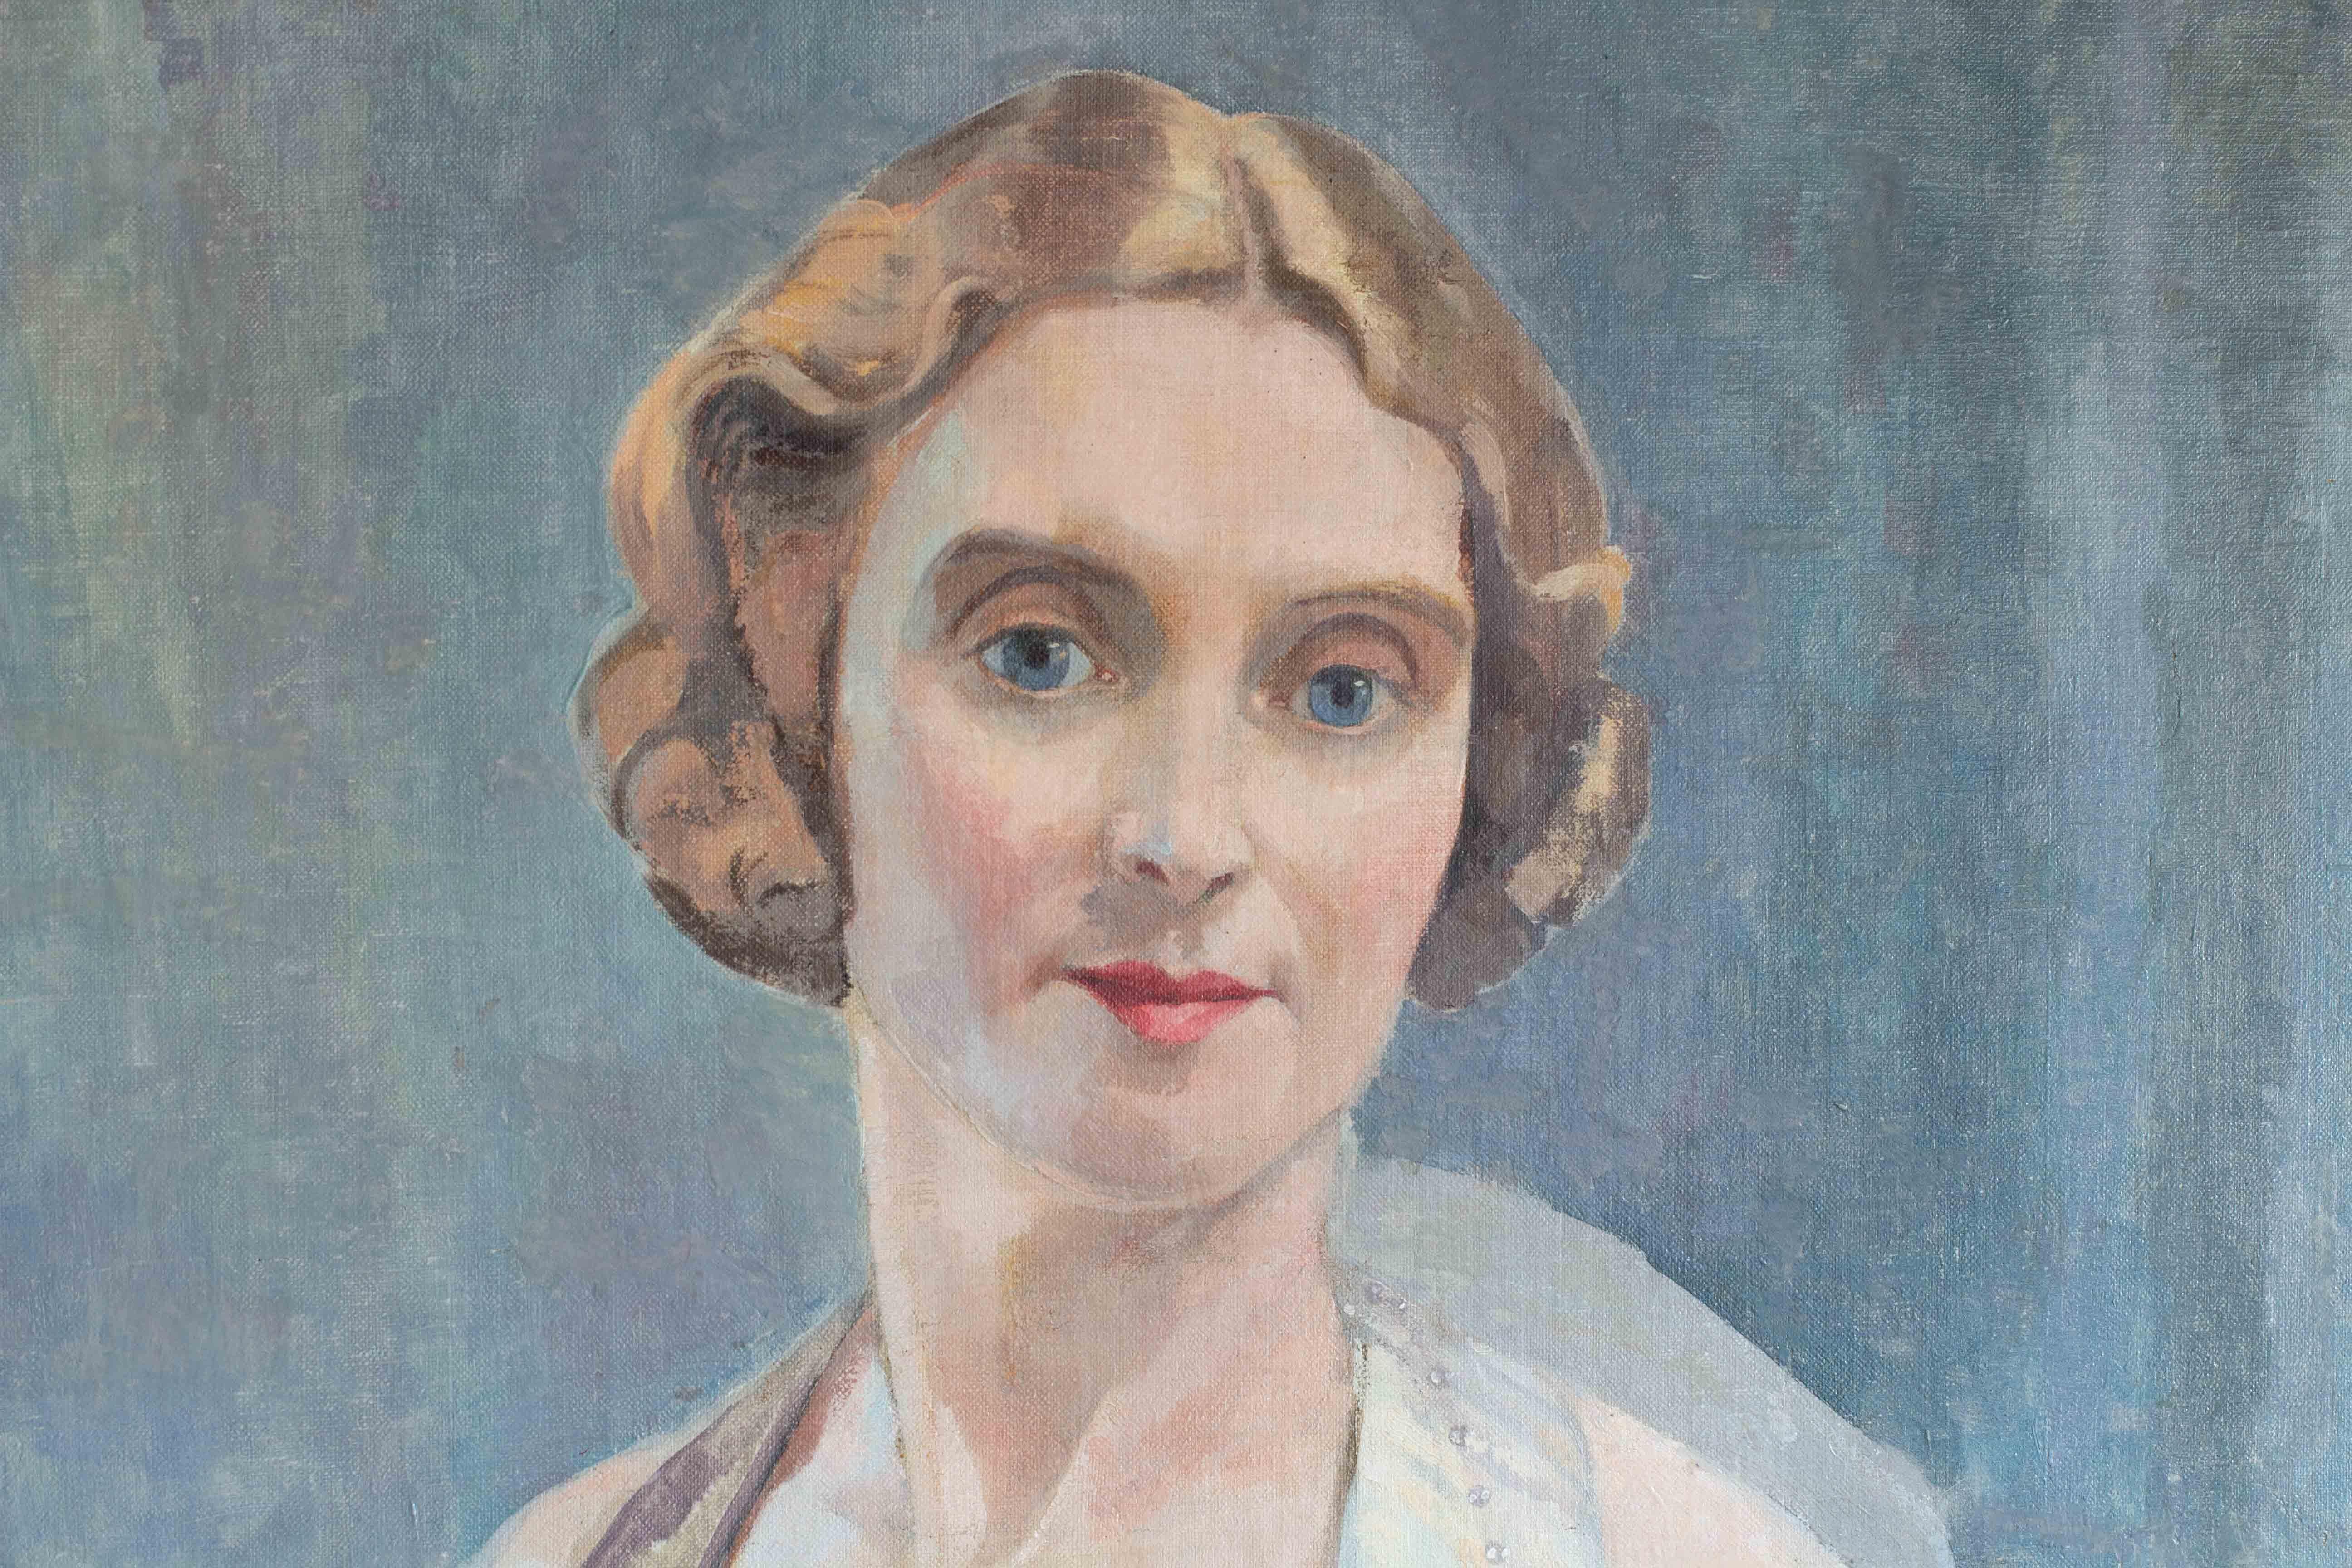 20th Century British portrait of a society lady thought to be Dame Anna Neagle - Gray Portrait Painting by Unknown